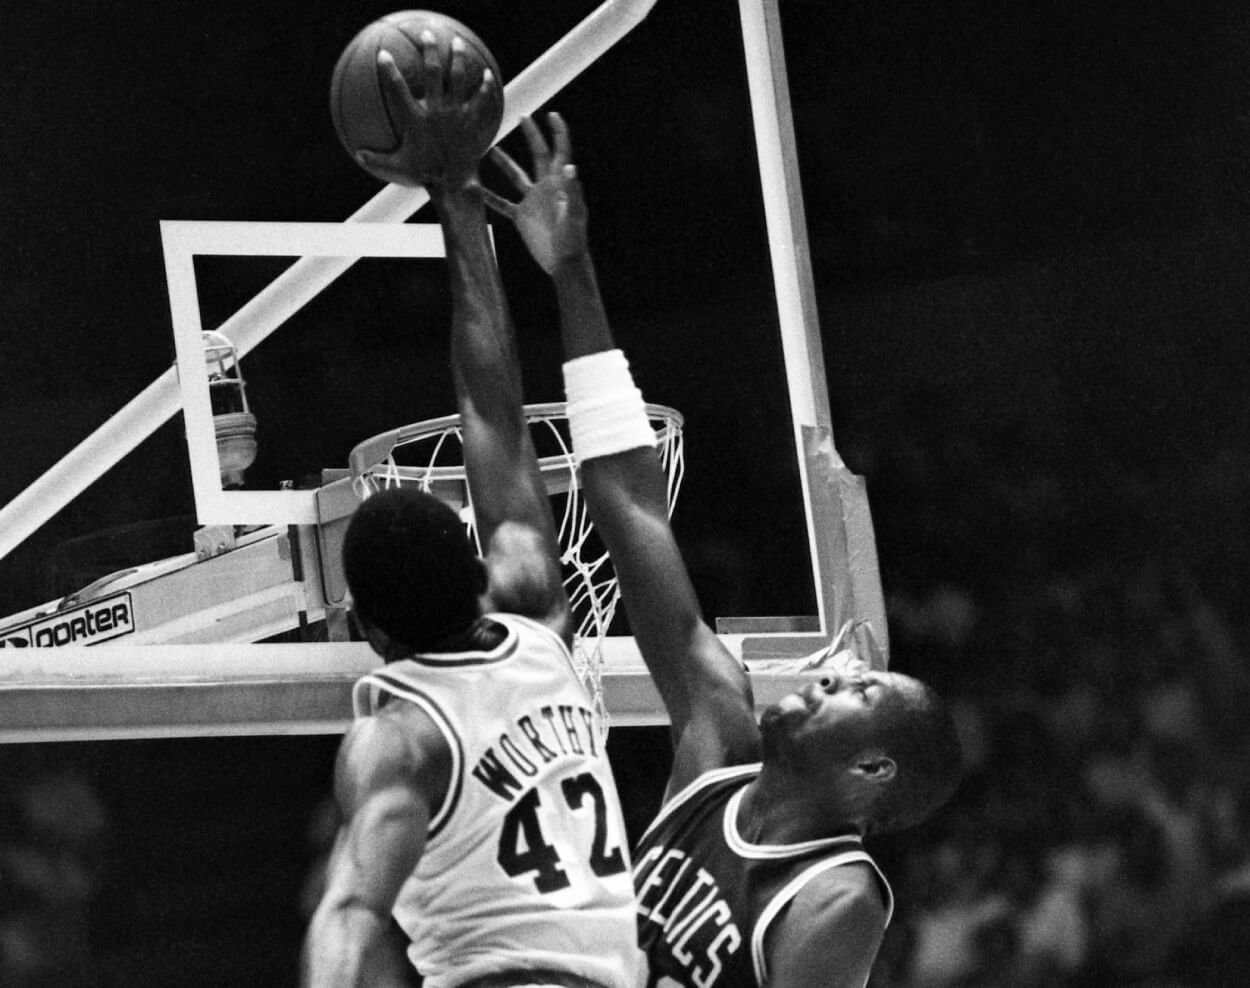 To Cedric Maxwell, 'Big Game James' Worthy Was Nothing but a Fictional ...